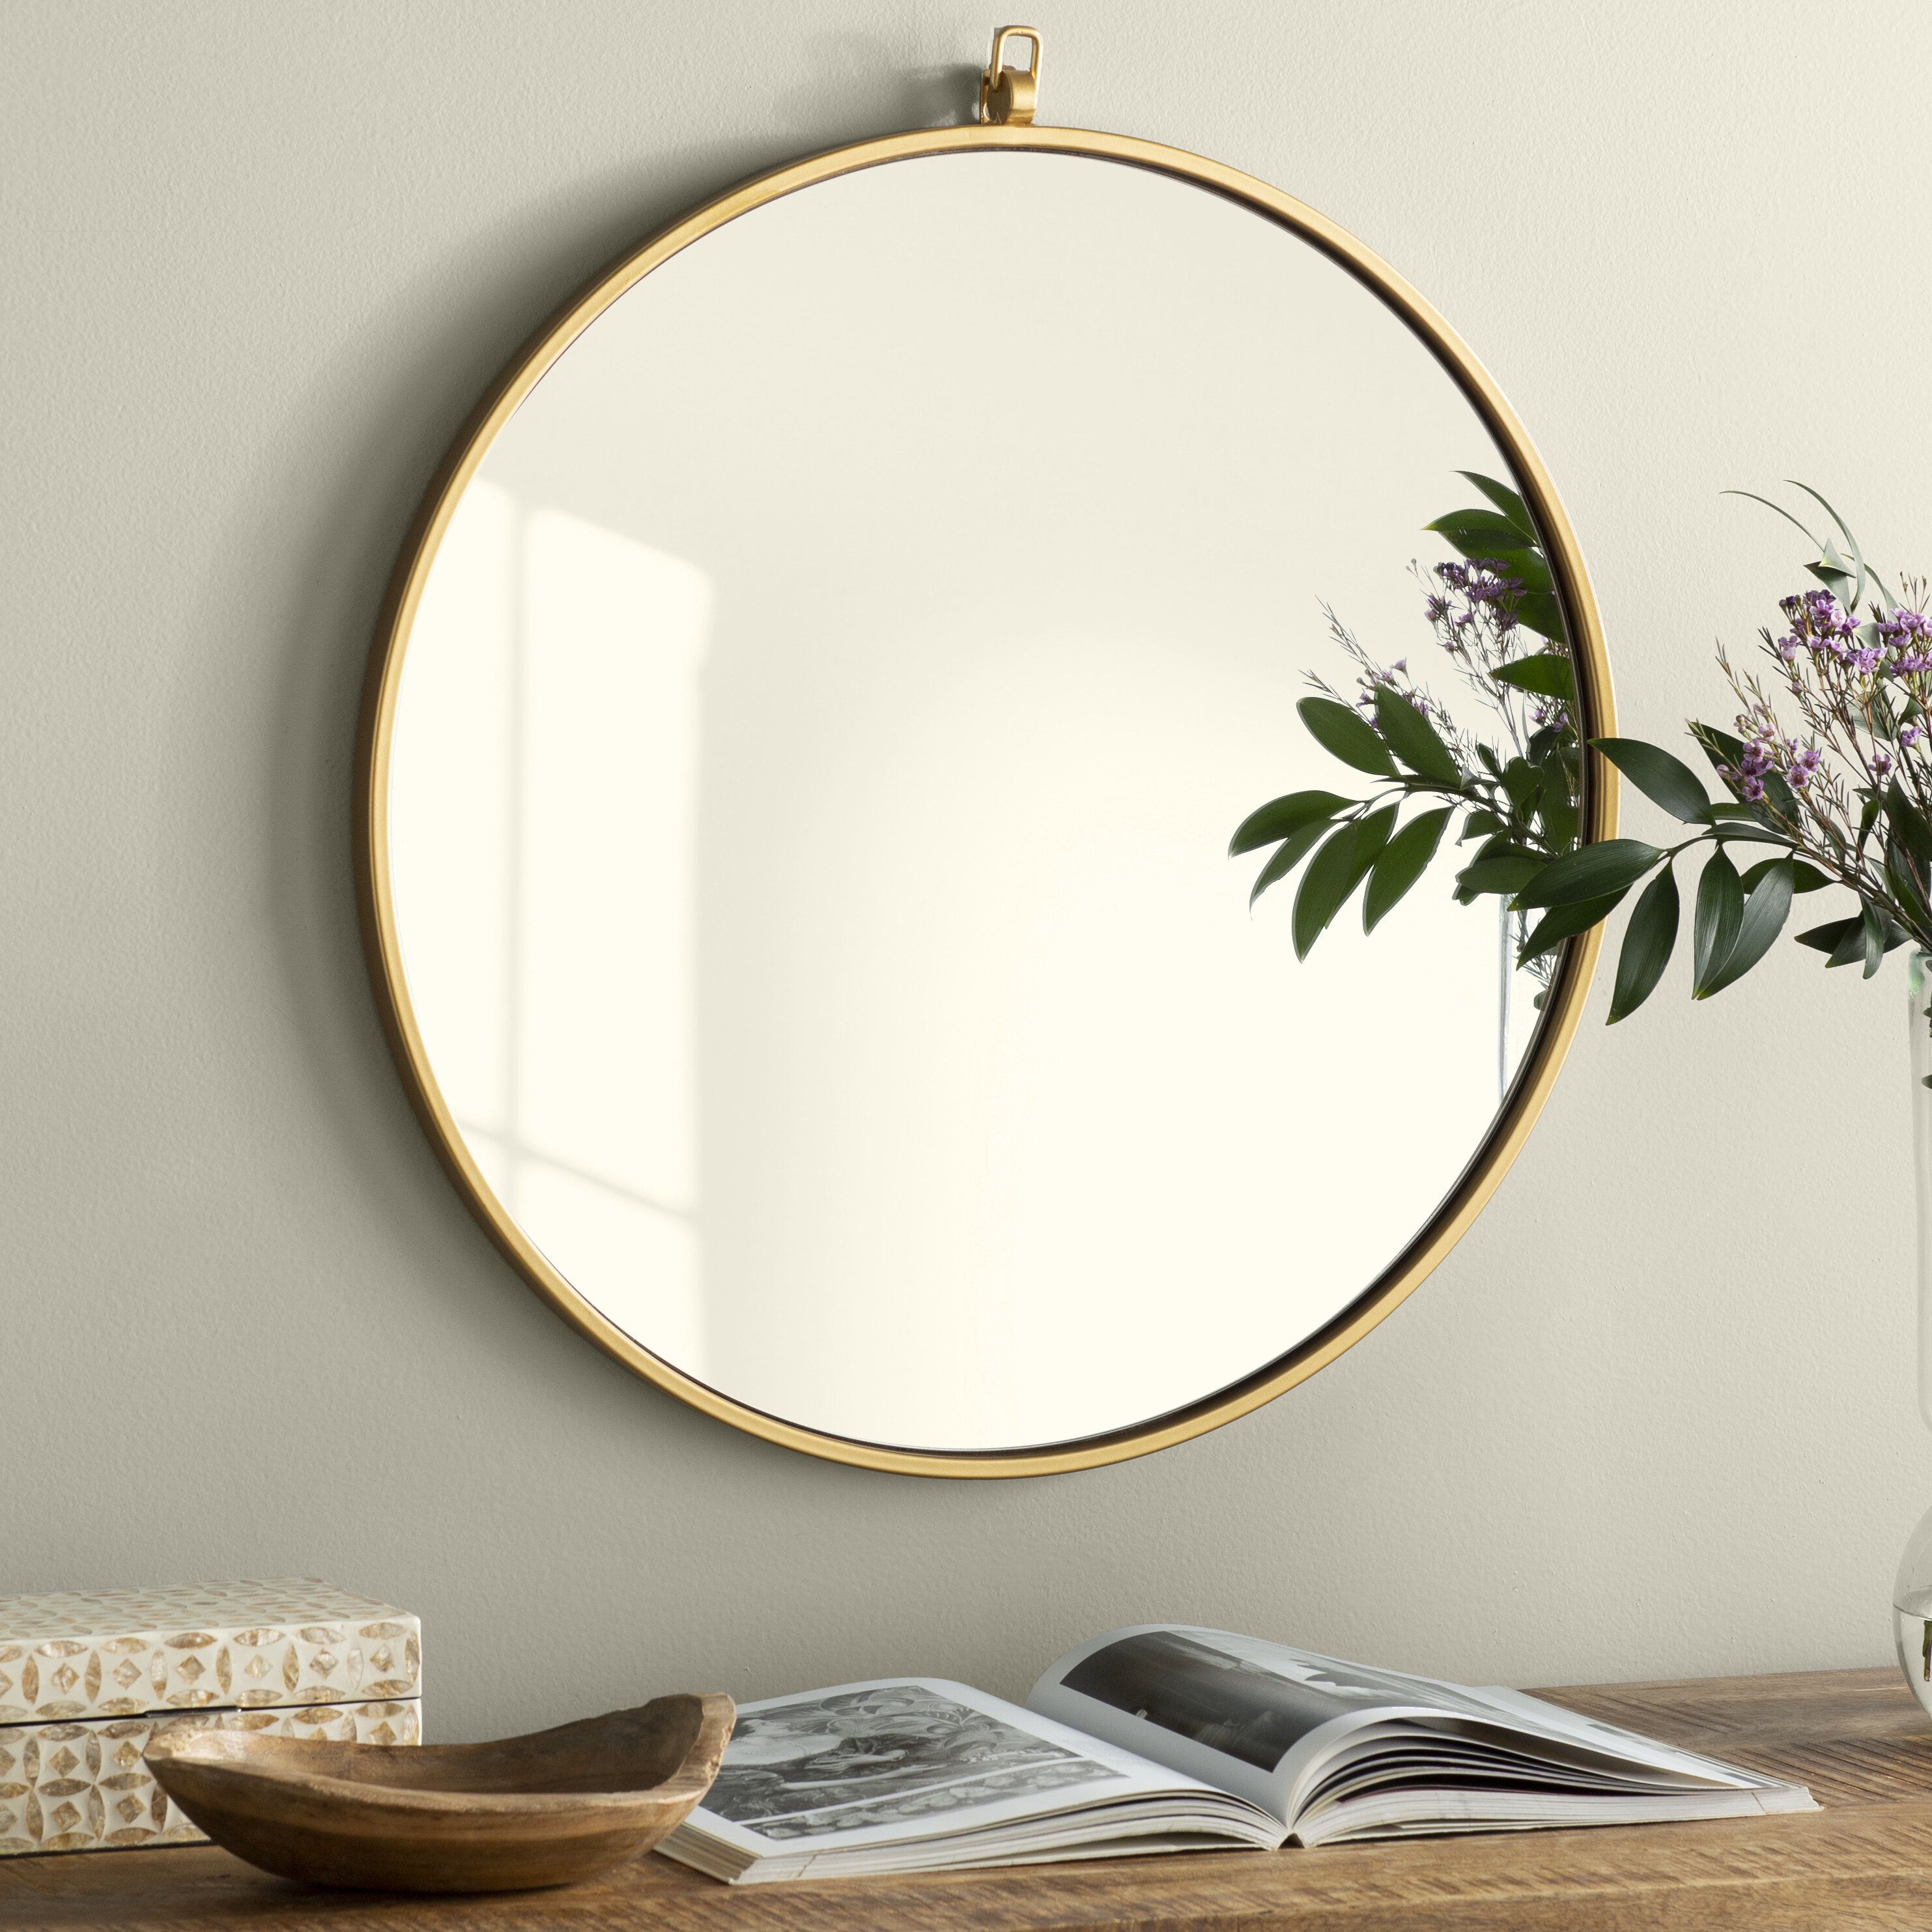 Tanner Accent Mirror In 2019 For The House T Mirrors Intended For Tanner Accent Mirrors (View 3 of 30)